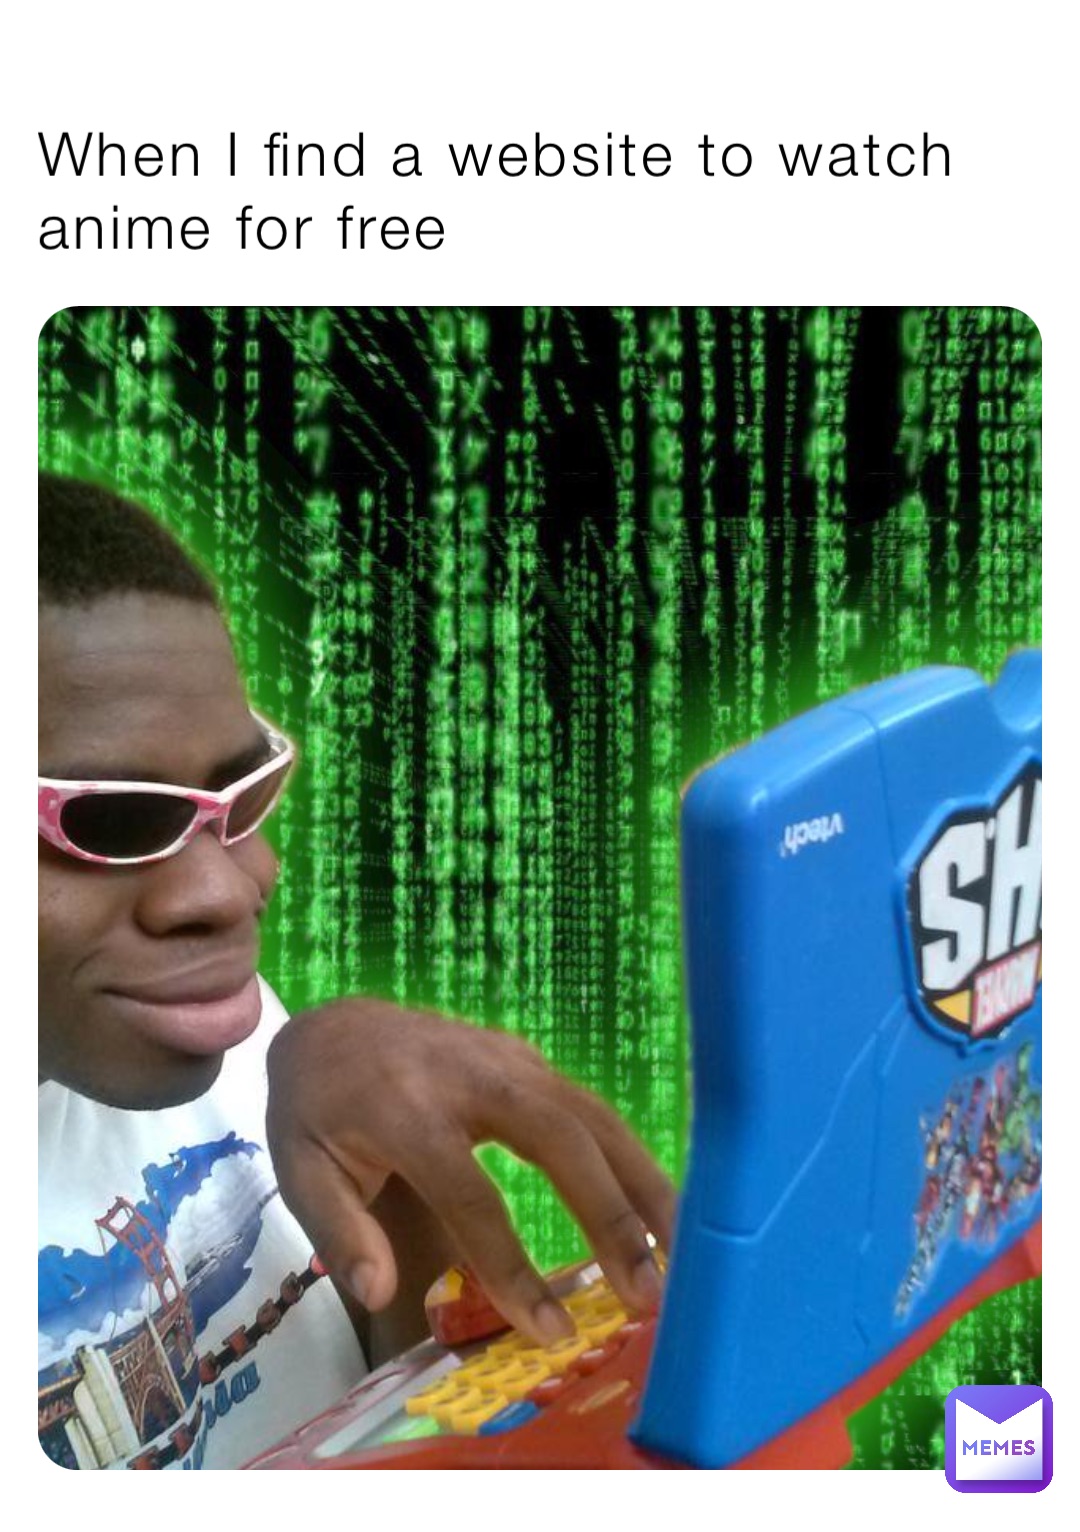 When I find a website to watch anime for free